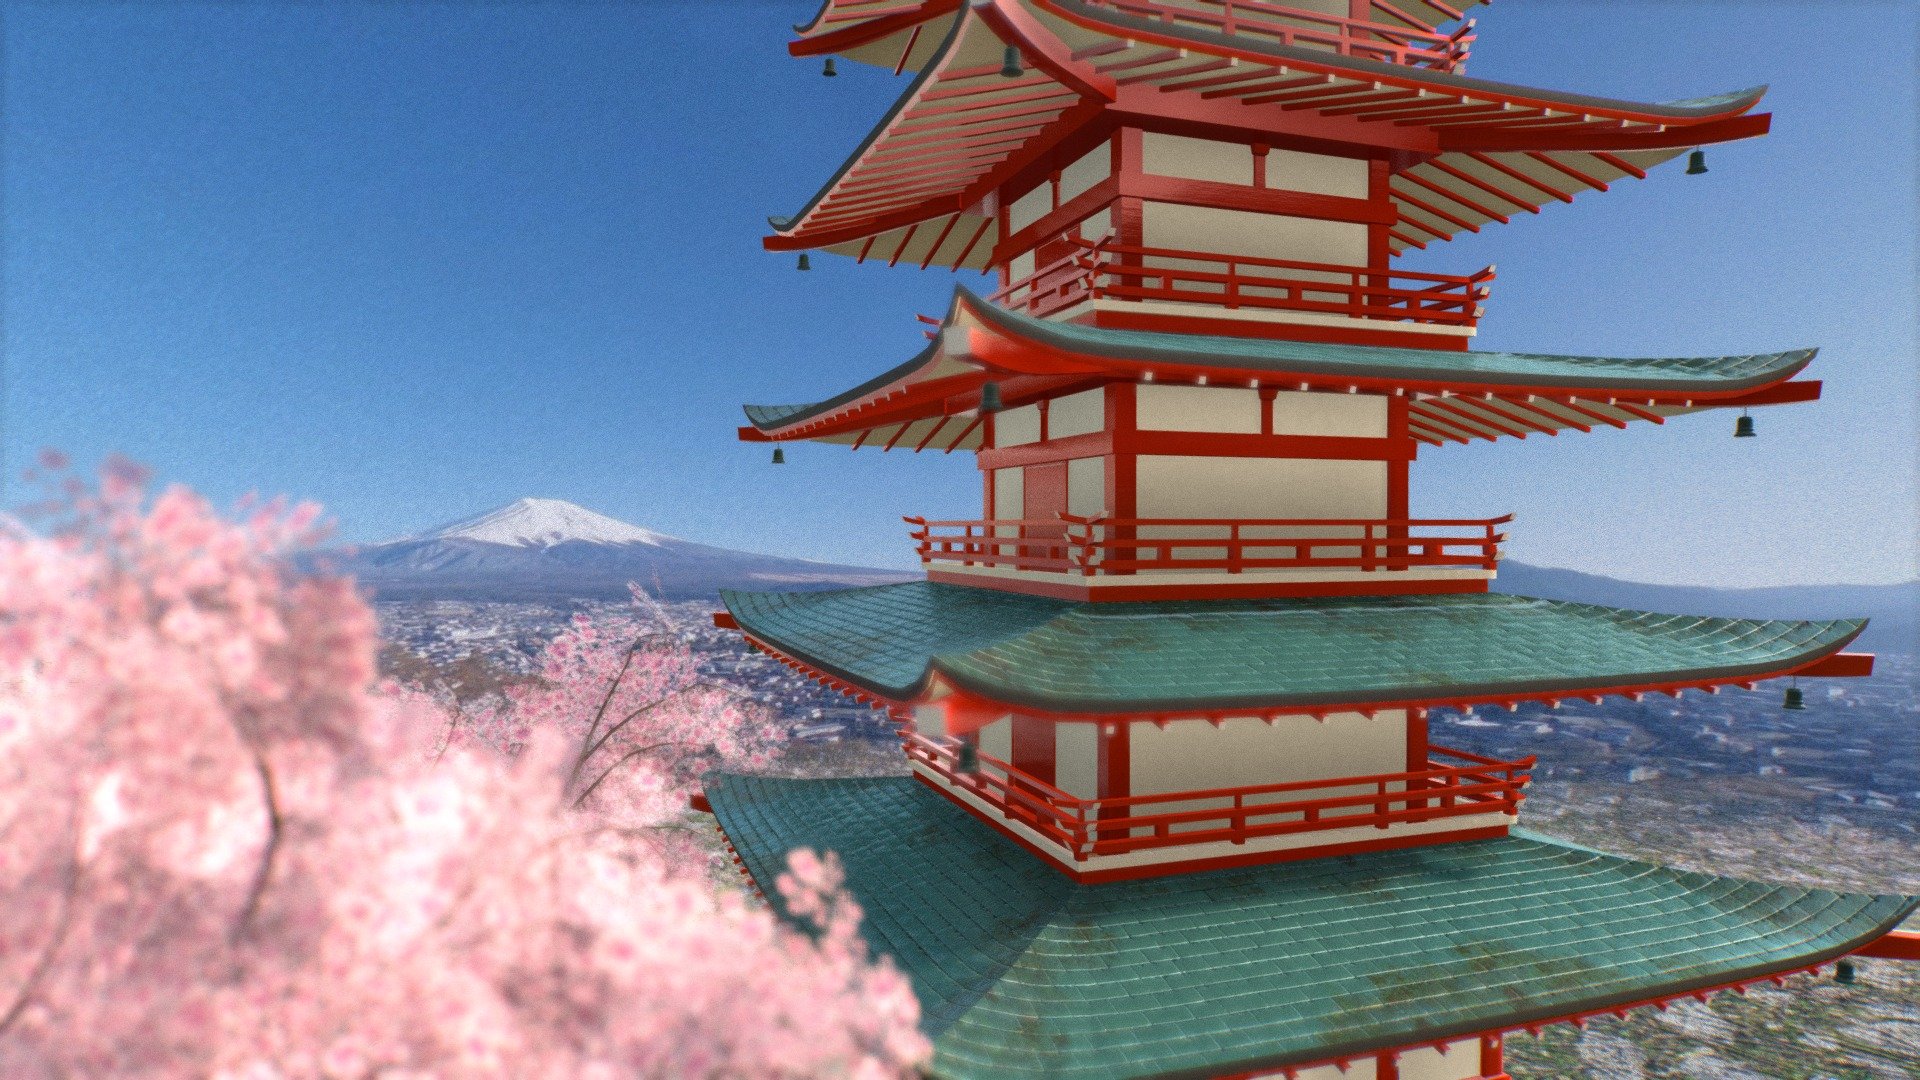 Obj, glb, blender formats attached.

Iconic pagoda on a hilltop facing Mt. Fuji in Arakurayama Sengen Park, reached via 398 steps.

3353-1 Arakura, Fujiyoshida, Yamanashi 403-0011, Japan
https://goo.gl/maps/1jFnr3WfDCyHskXD8

The Chureito Pagoda (忠霊塔, Chūreitō) is a five storied pagoda on the mountainside overlooking Fujiyoshida City and Mount Fuji off in the distance. The pagoda is part of the Arakura Sengen Shrine and was built as a peace memorial in 1963 nearly 400 steps up the mountain from the shrine's main buildings.

The location offers spectacular views of Mount Fuji in combination with the pagoda, especially during the cherry blossom season in mid April when there are hundreds of trees in bloom and during the autumn color season which usually takes place in the first half of November. The spot is particularly popular among photographers as it allows for some wonderfully stereotypical shots of Japan.

忠霊塔 - Chureito Pagoda  忠霊塔 3Dモデルのダウンロード - Buy Royalty Free 3D model by VRA (@architect47) 3d model